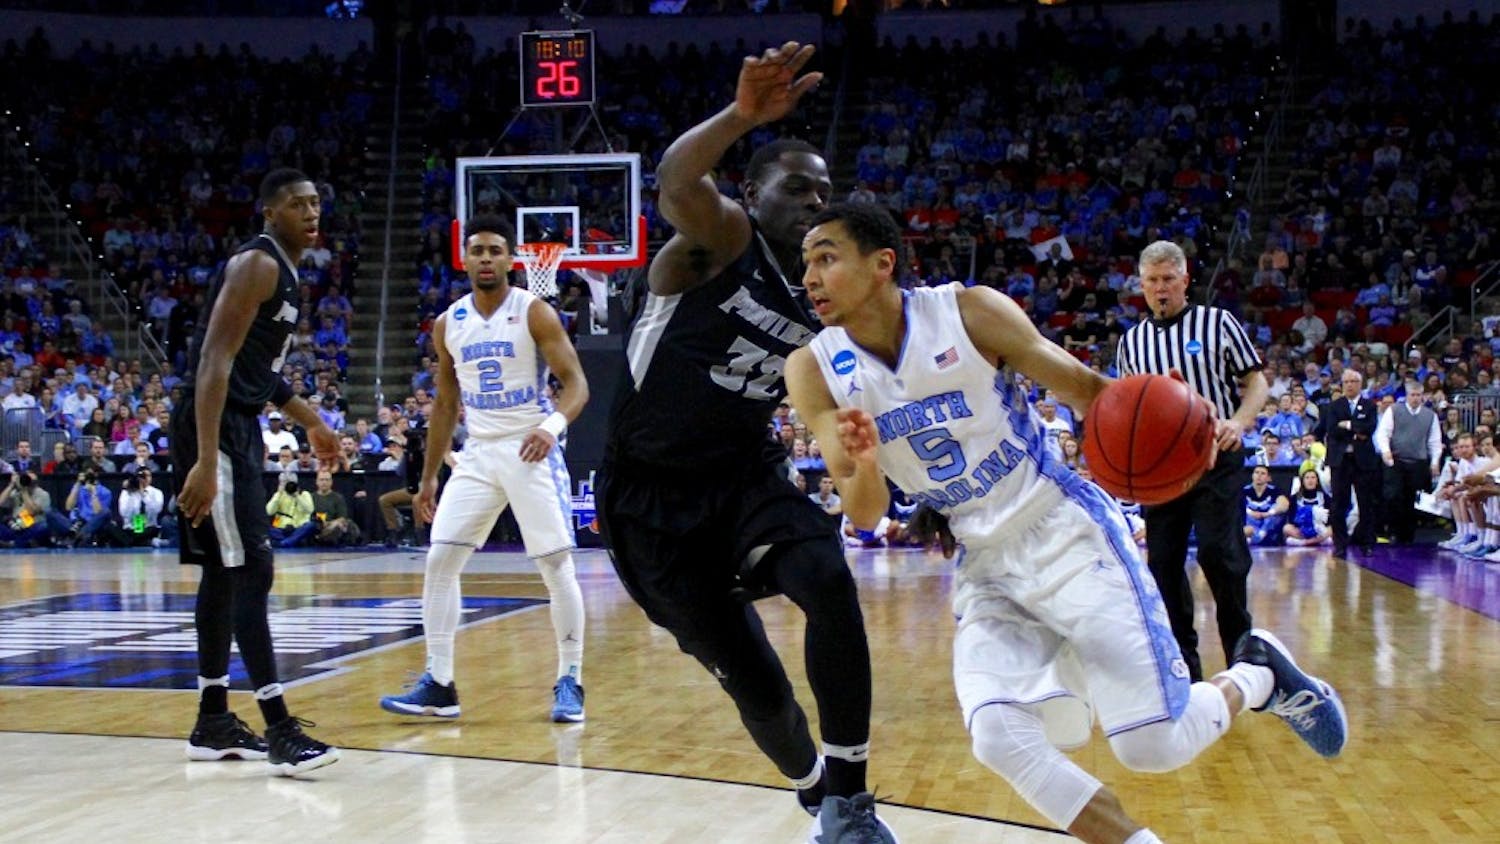 Marcus Paige drives towards the basket. Paige scored 12 points on Saturday night.